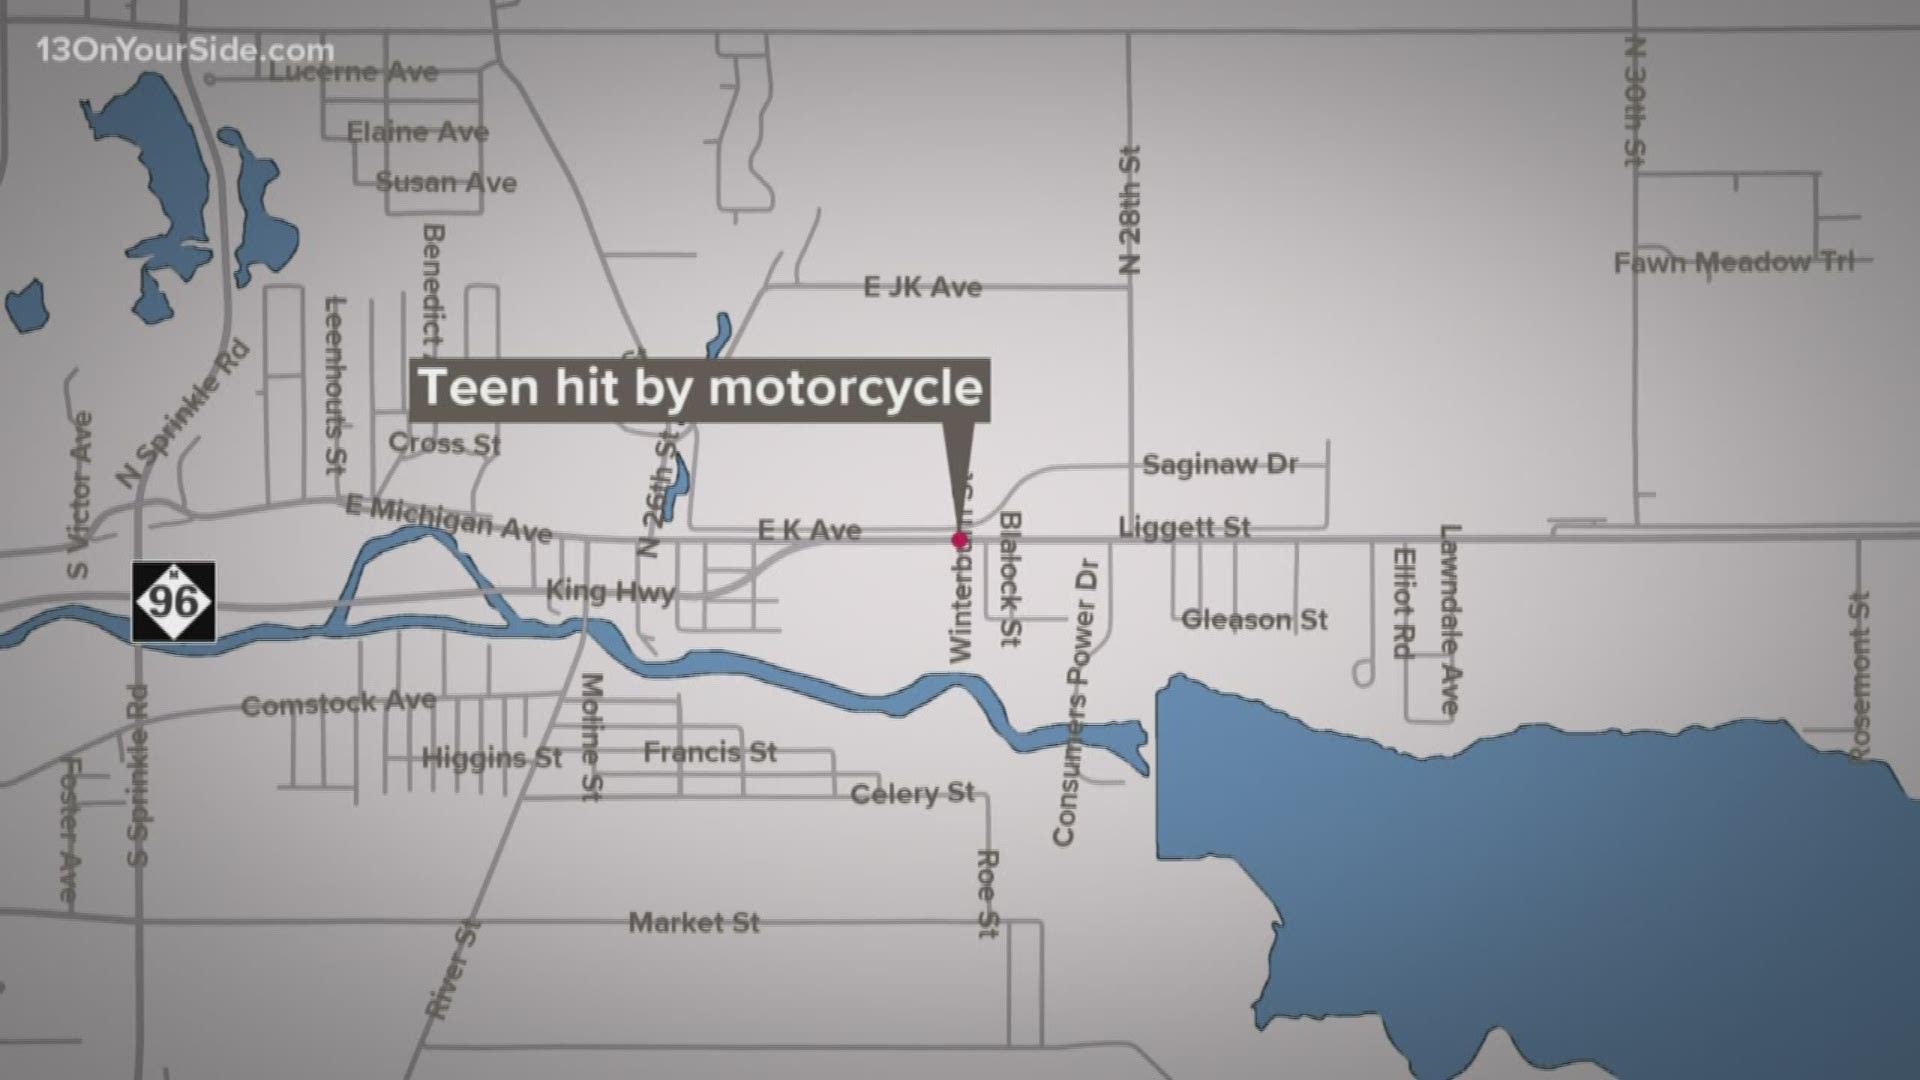 Both the motorcycle rider and the pedestrian were hurt in the crash. The 16-year-old pedestrian is in critical condition at the hospital. The 35-year-old rider is in stable condition this morning.